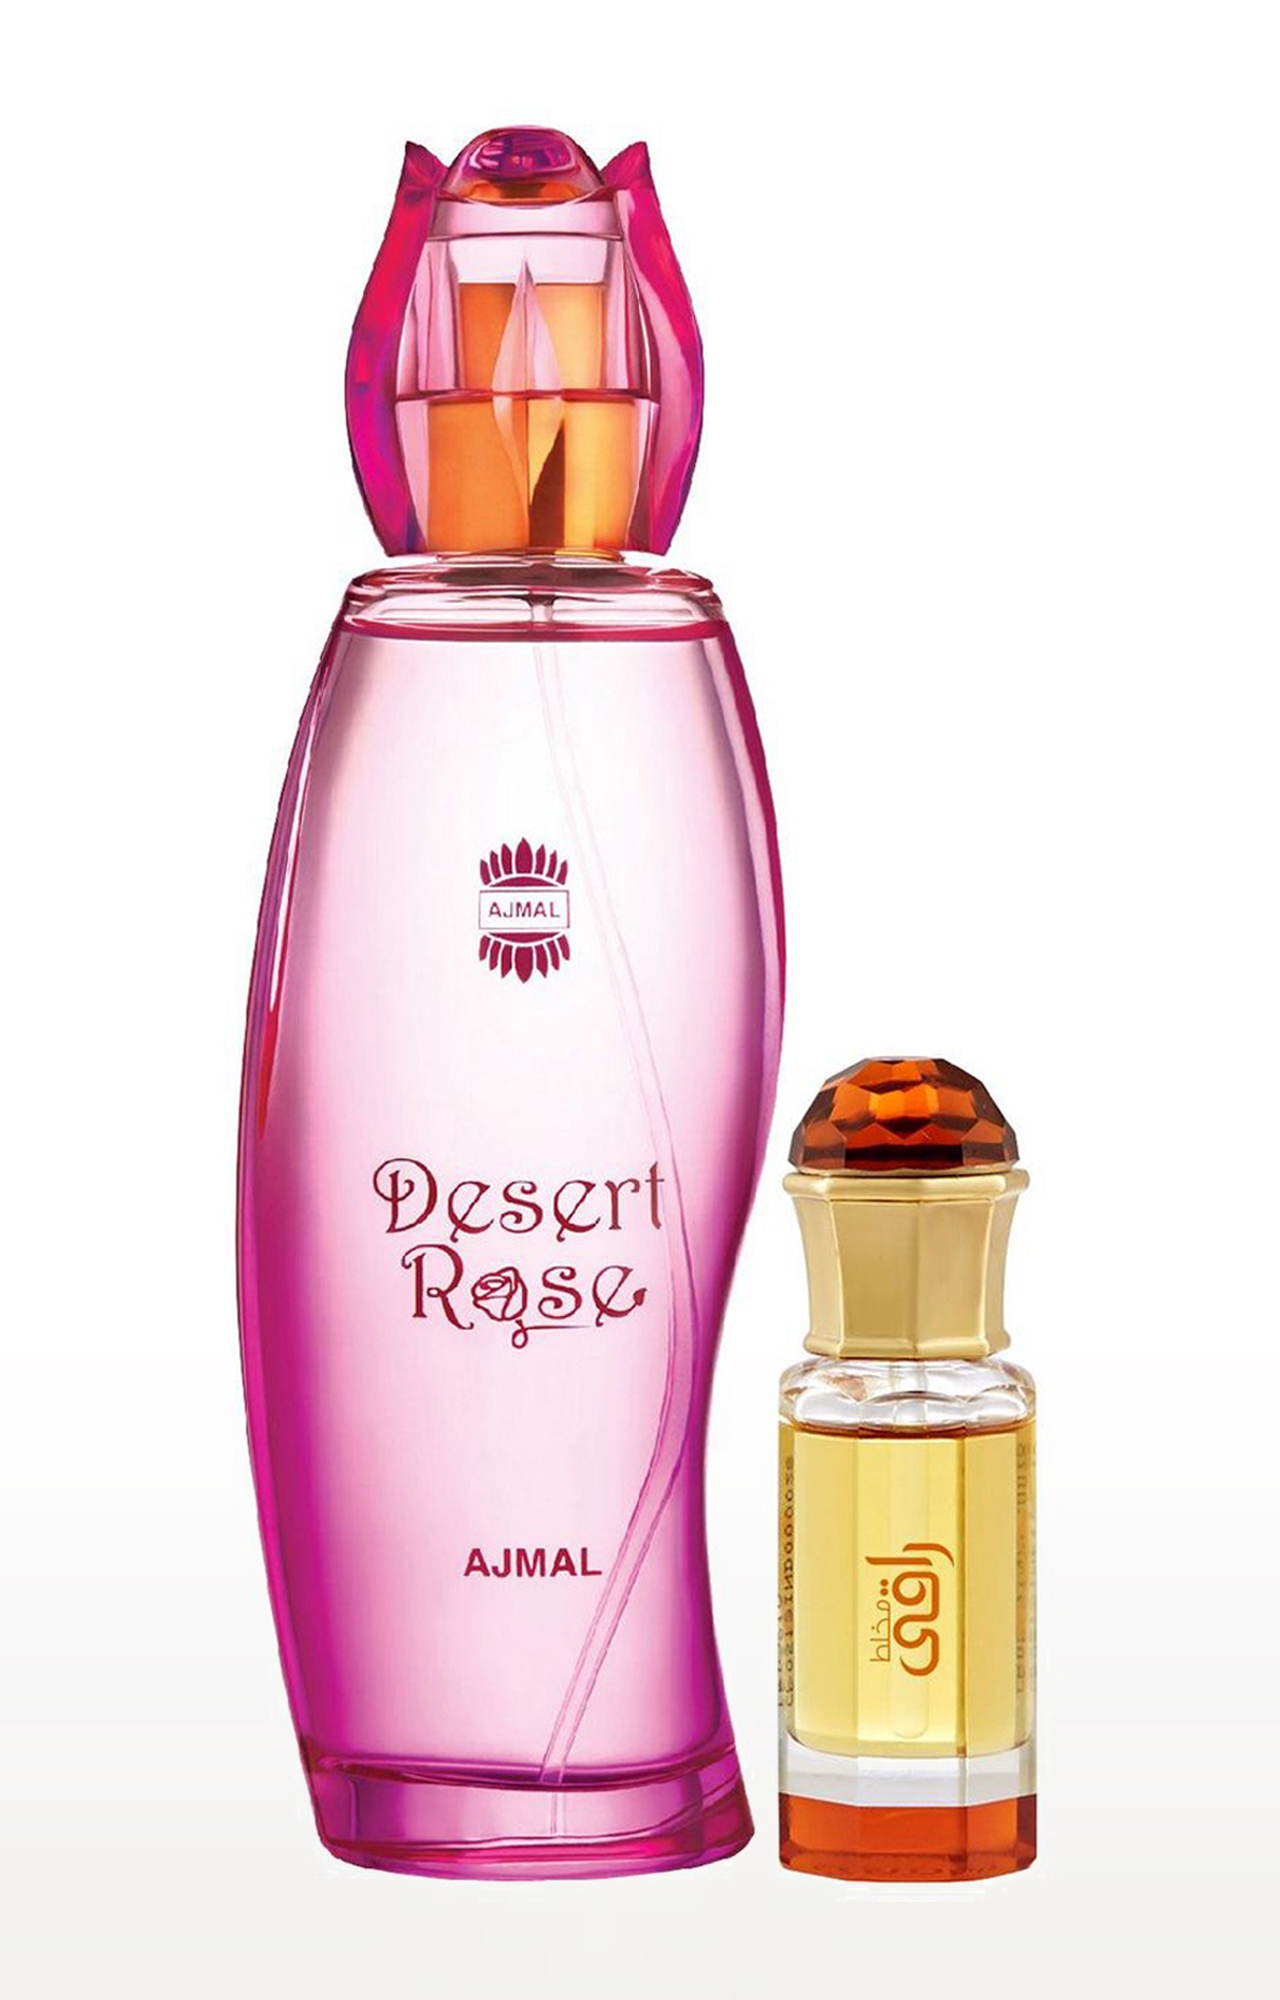 Ajmal | Ajmal Desert Rose EDP Oriental Perfume 100ml for Women and Mukhallat Raaqi Concentrated Perfume Oil Fruity Alcohol-free Attar 10ml for Unisex